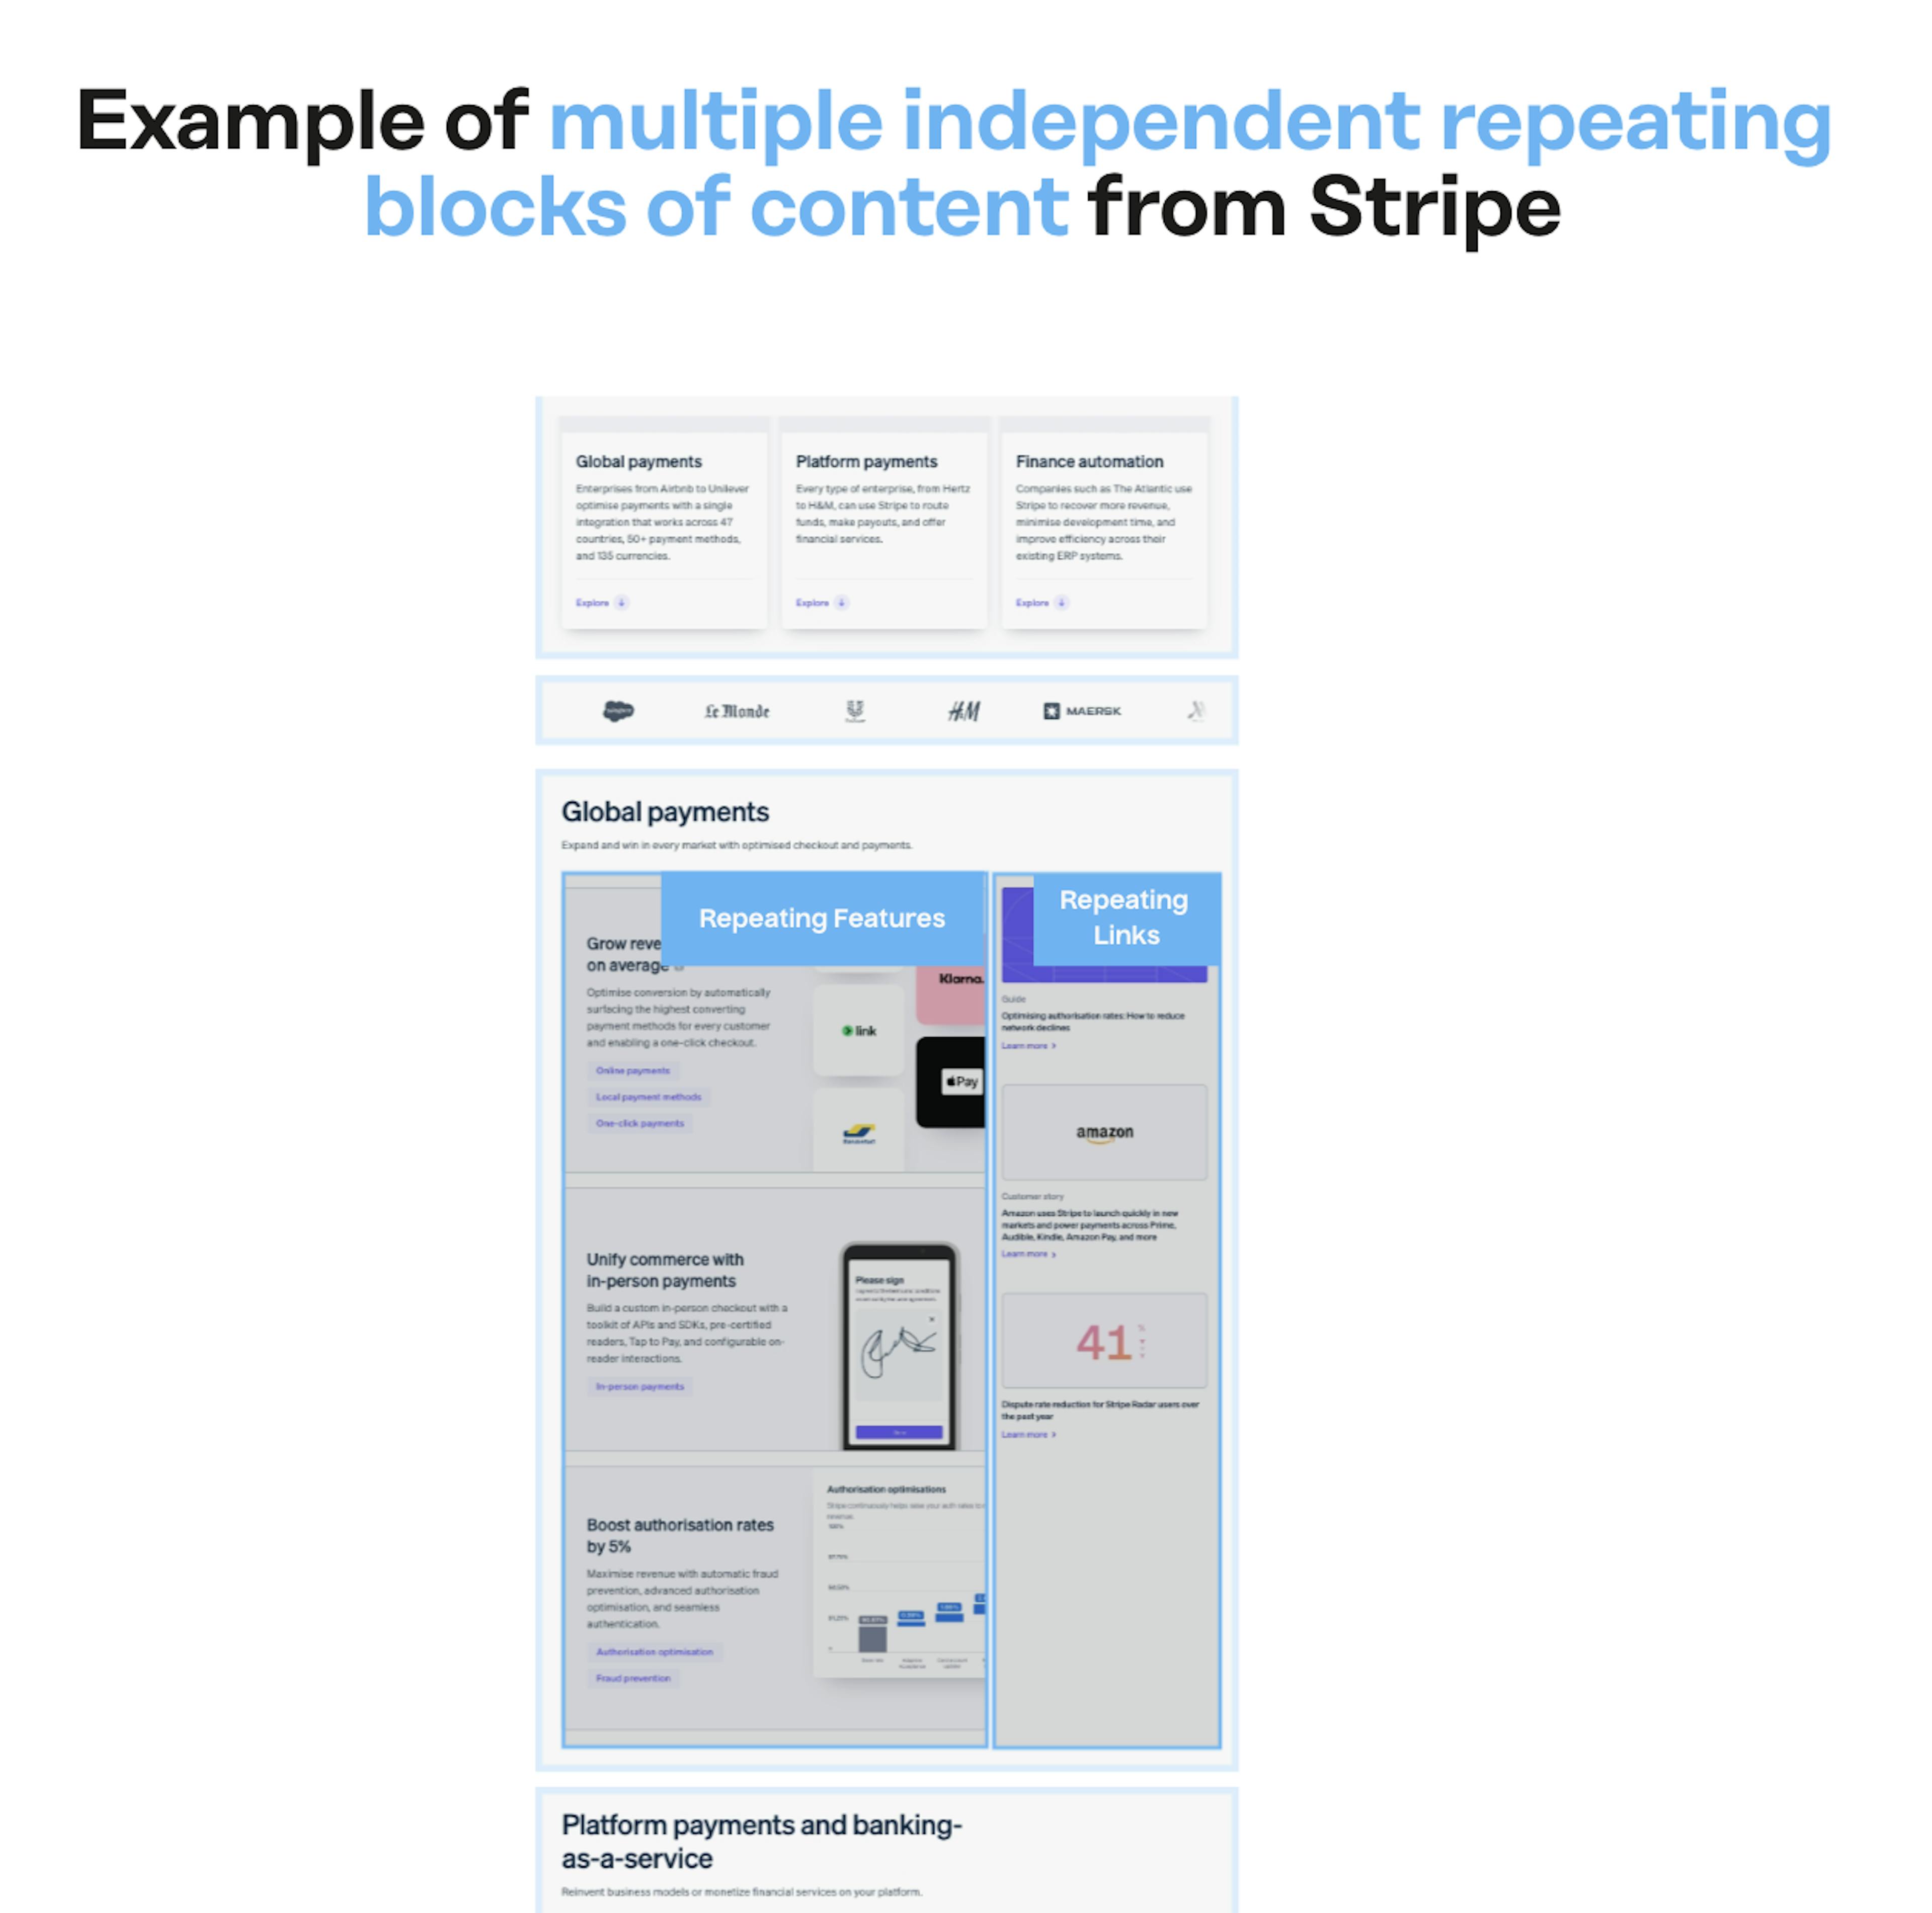 Screenshot of a section from the Stripe website